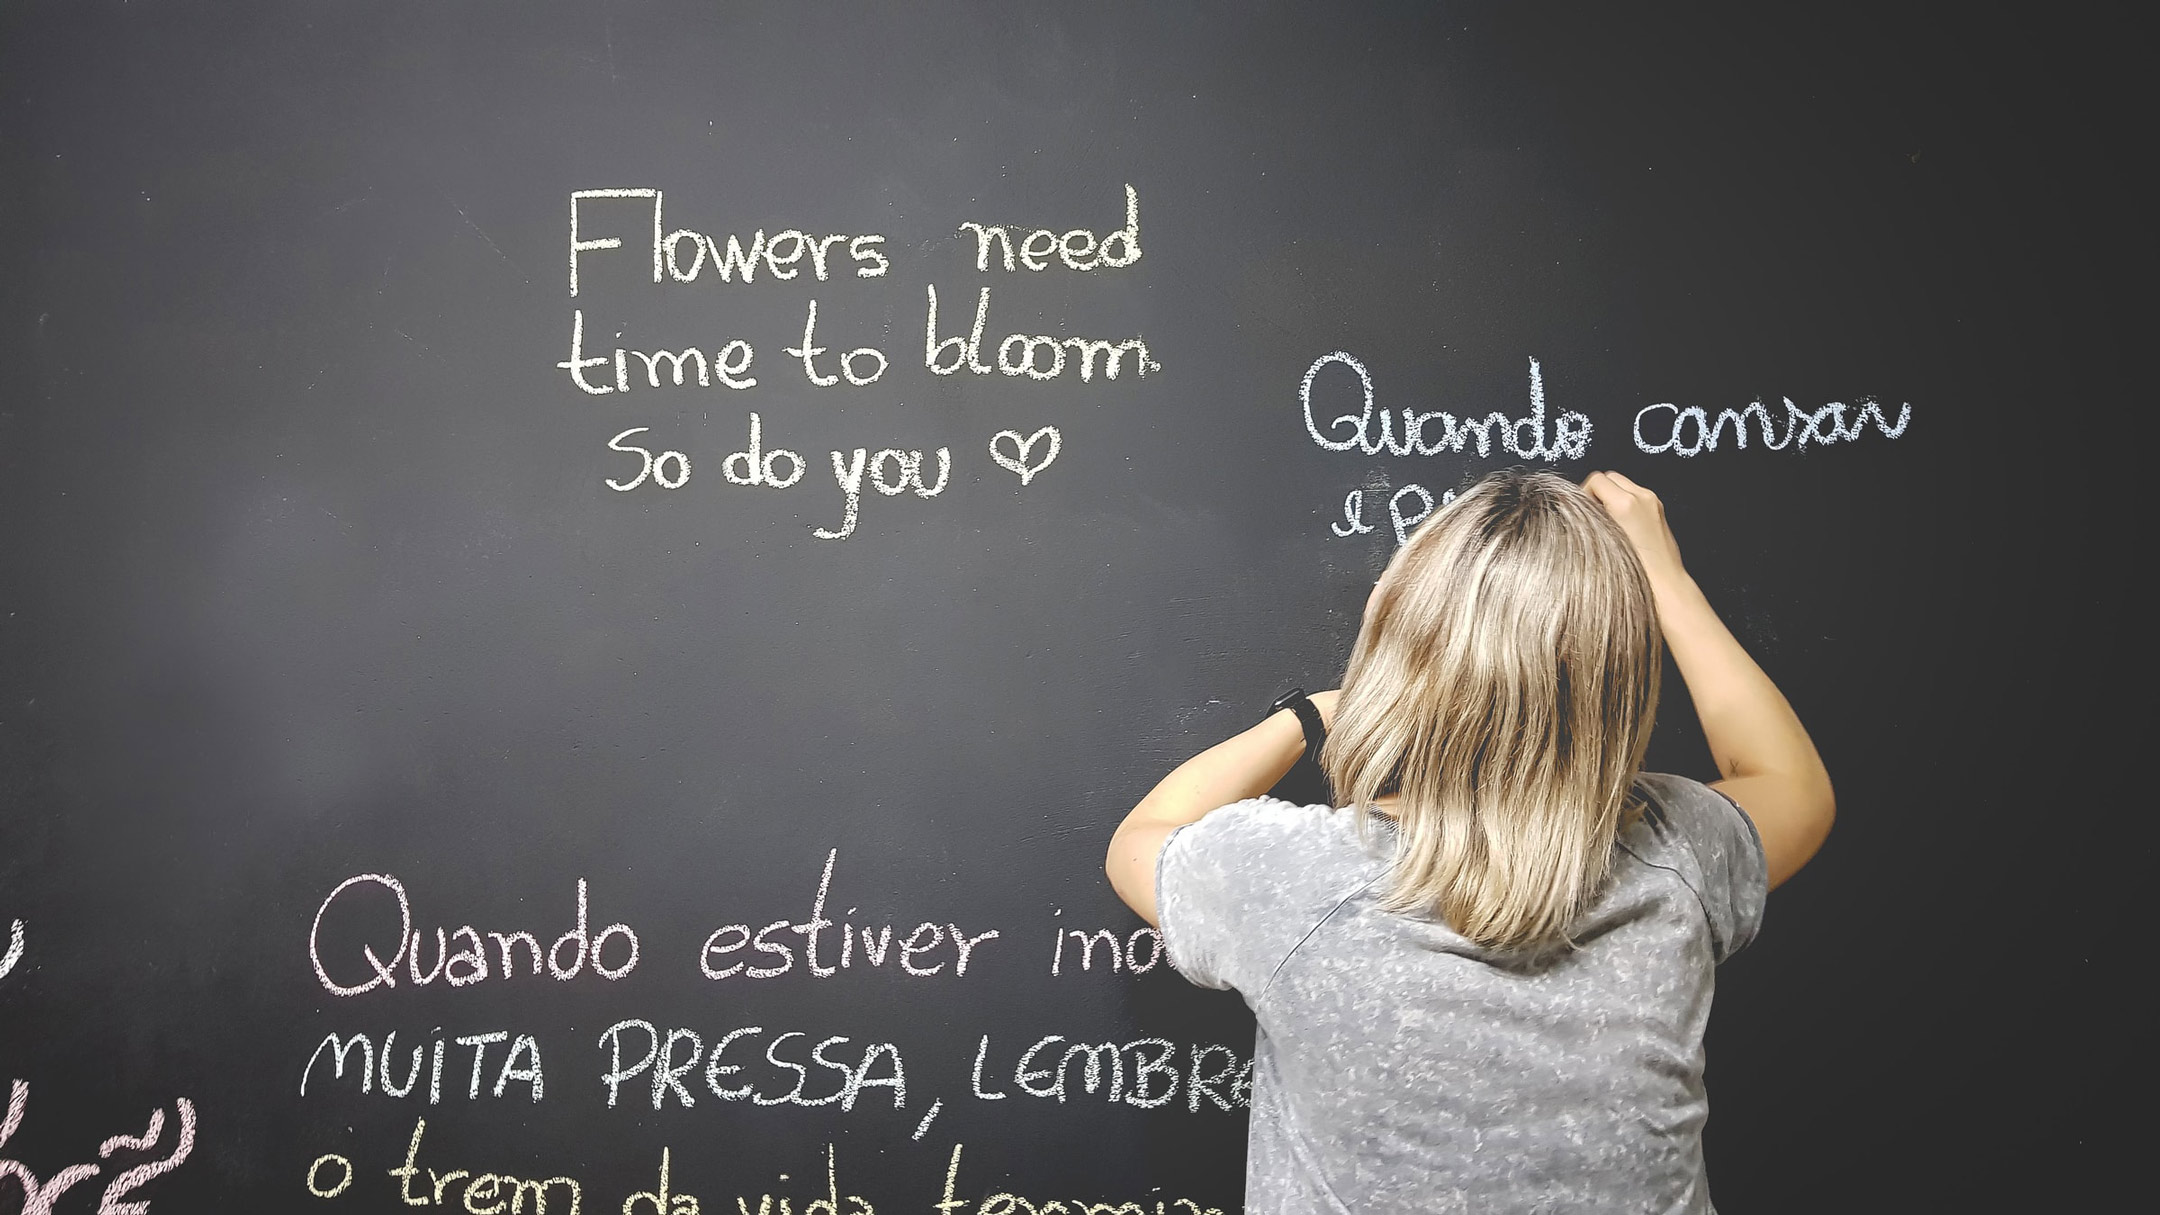 girl-at-blackboard-foreign-languages2160